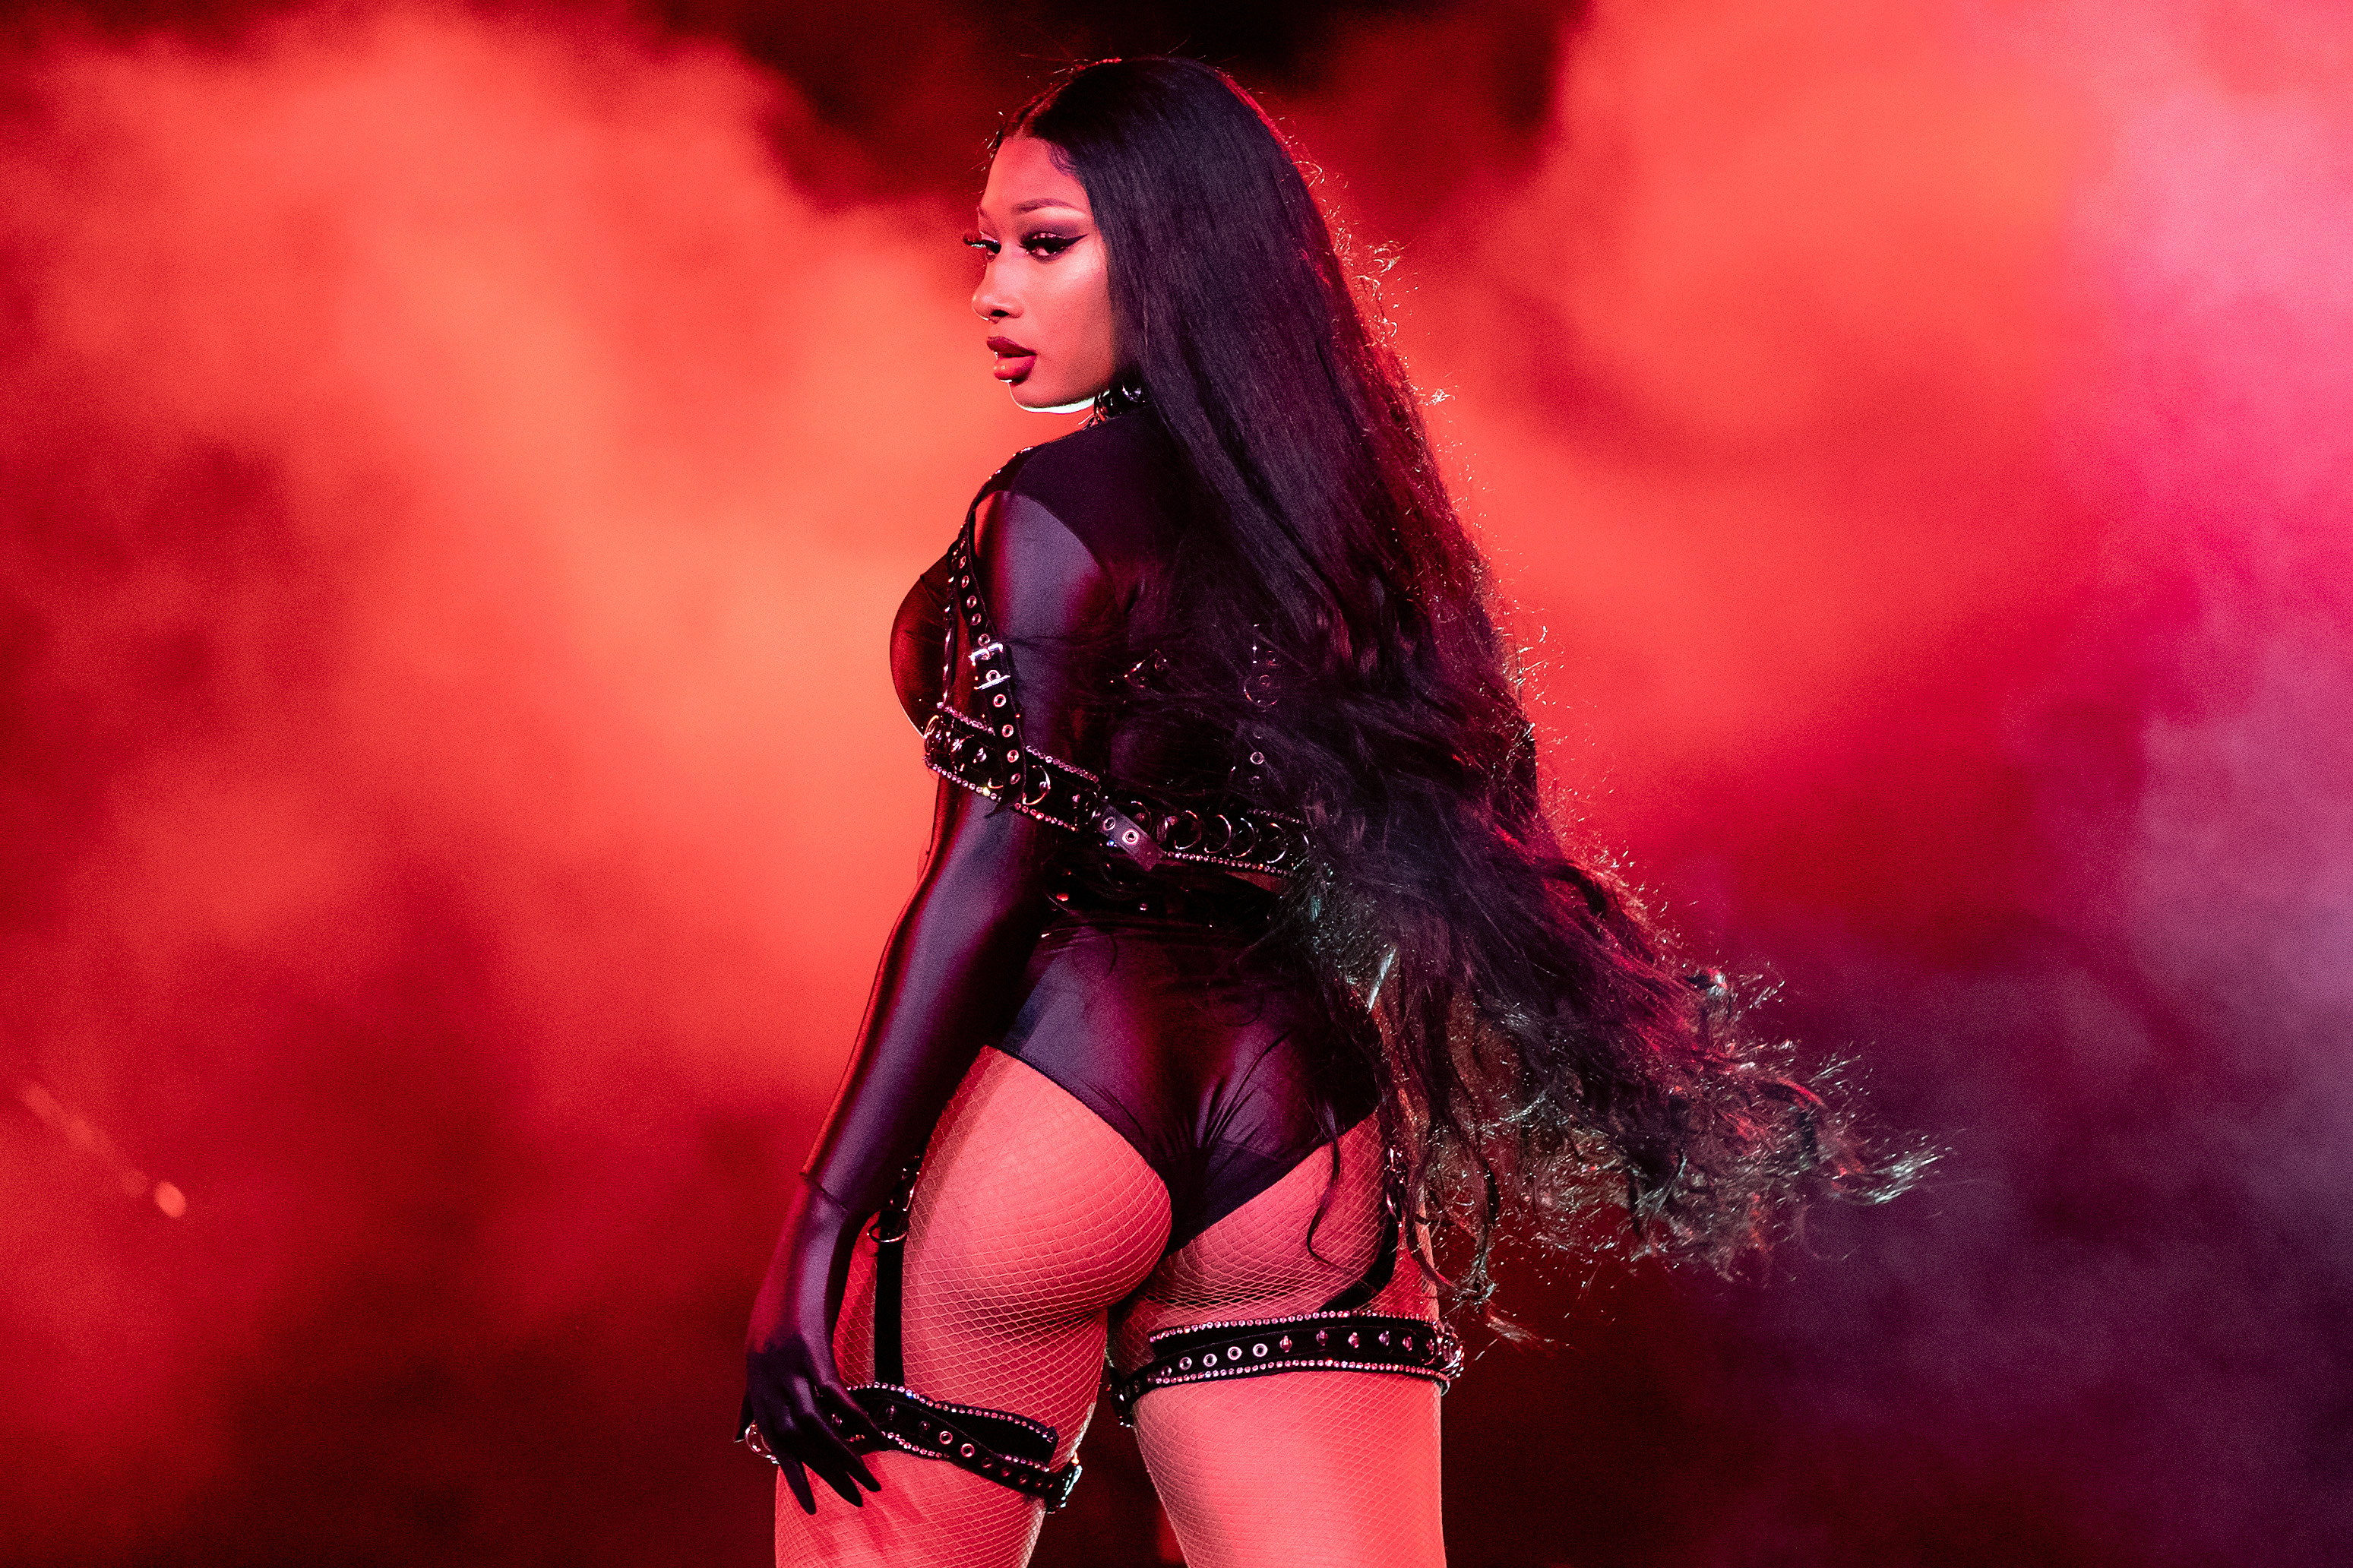 Megan Thee Stallion performs onstage during Day 2 of "Red Rocks Unpaused" 3-Day Music Festival presented by Visible at Red Rocks Amphitheatre on September 02, 2020 in Morrison, Colorado.